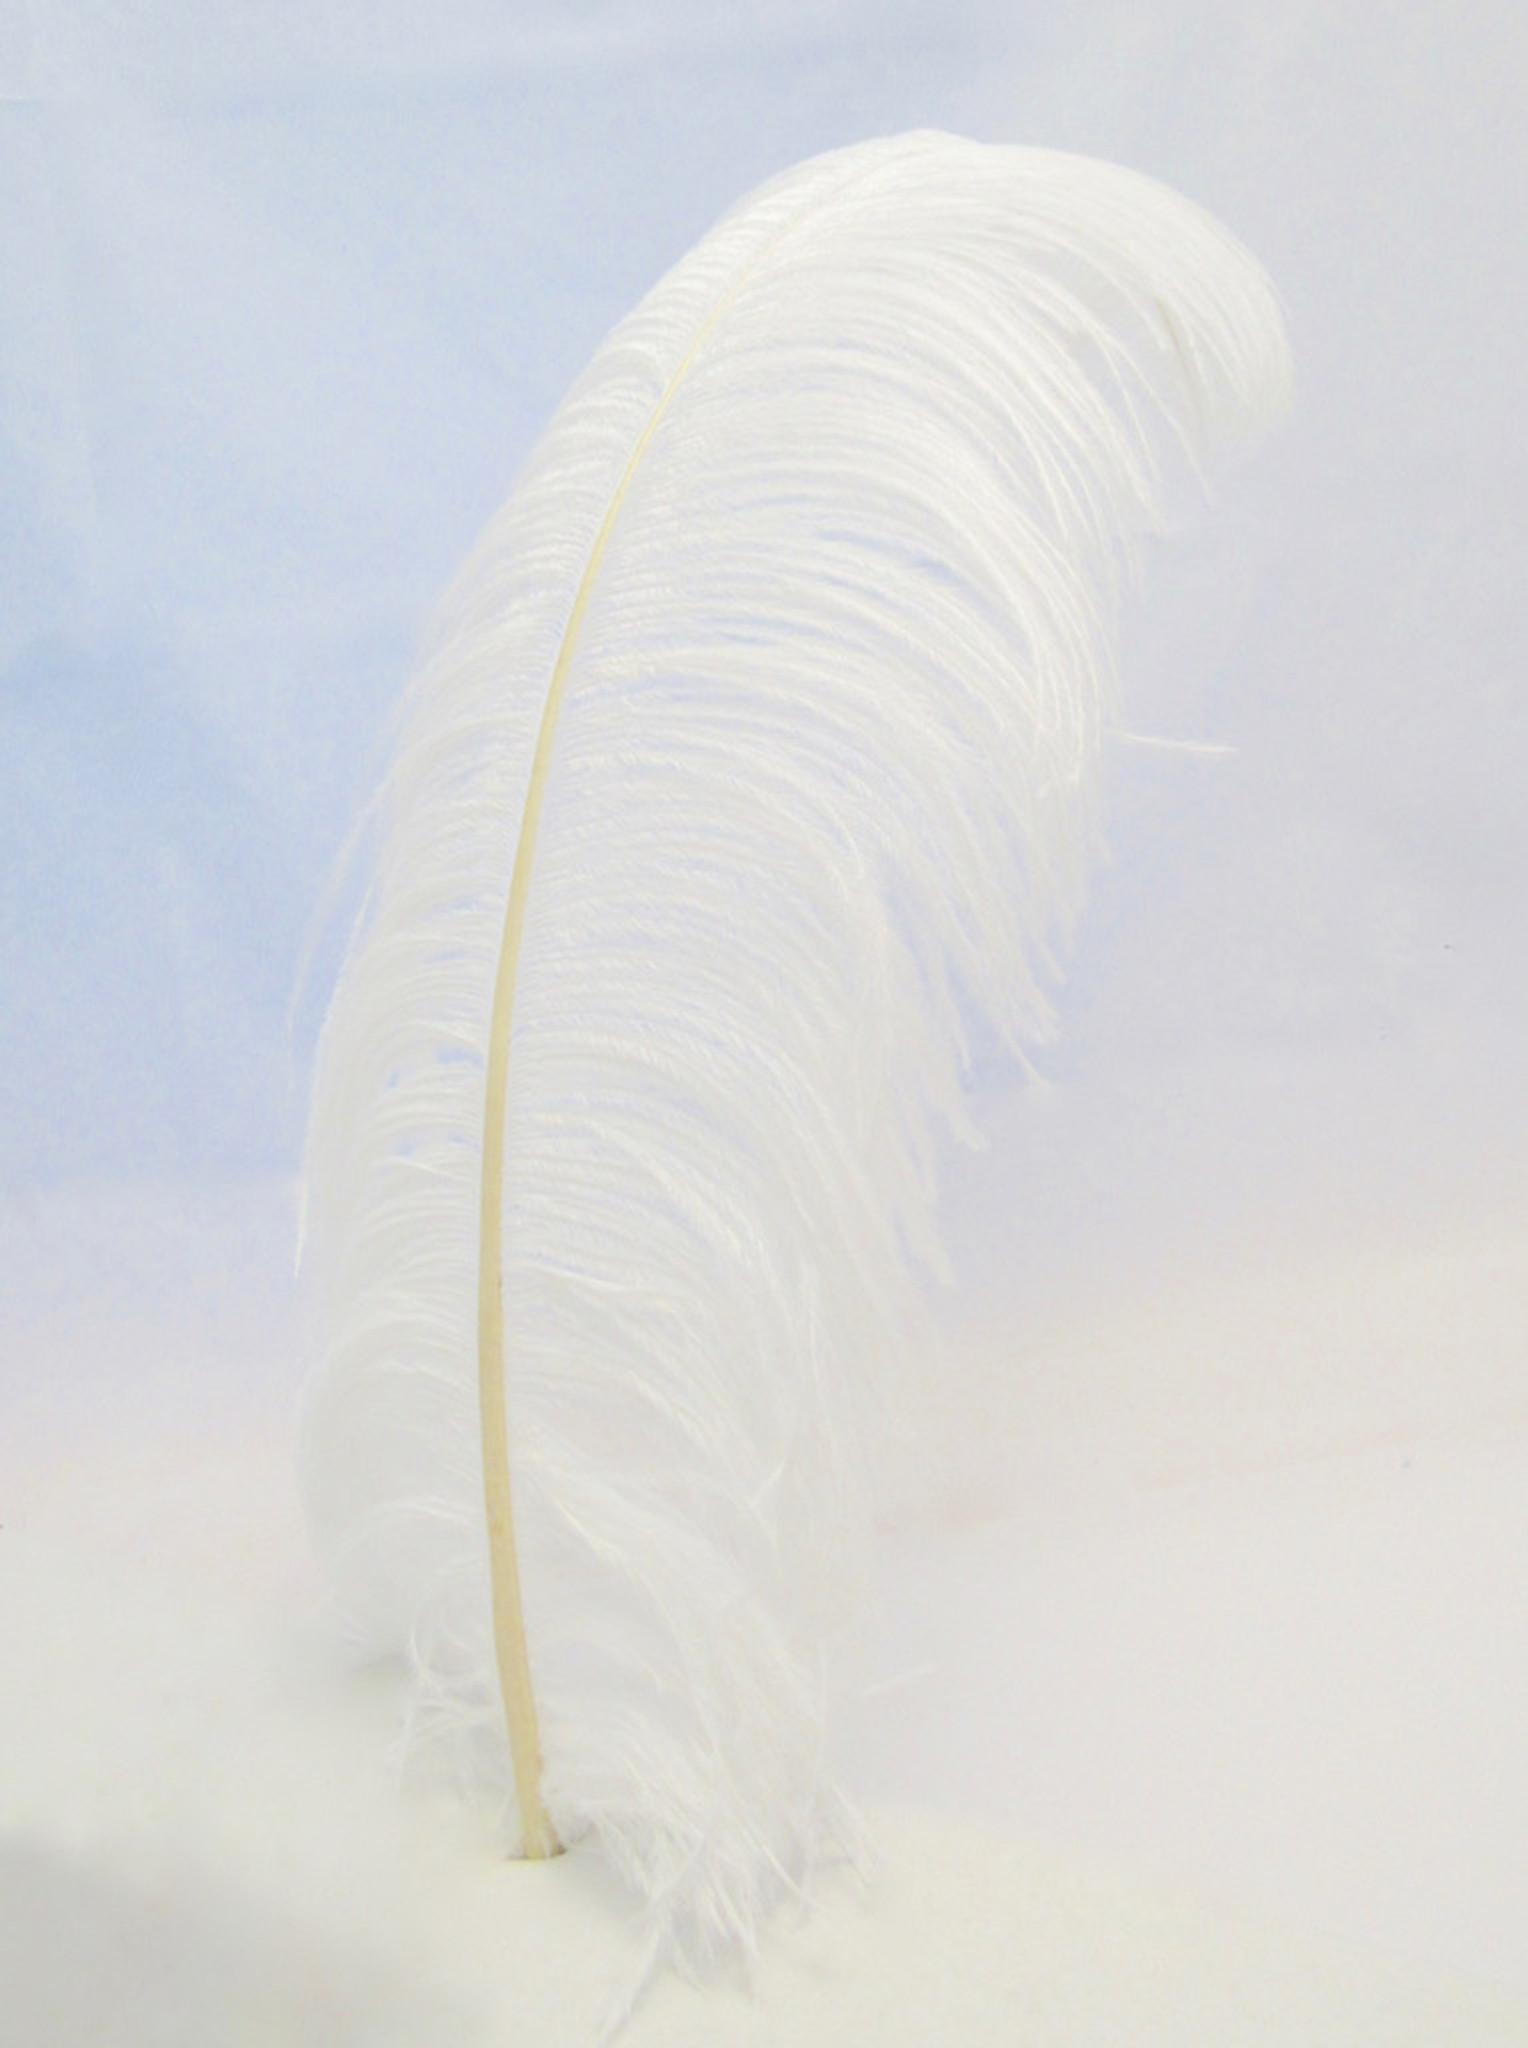 Bulk Gray Ostrich Feathers Plumes 22-24 inches Wholesale Large